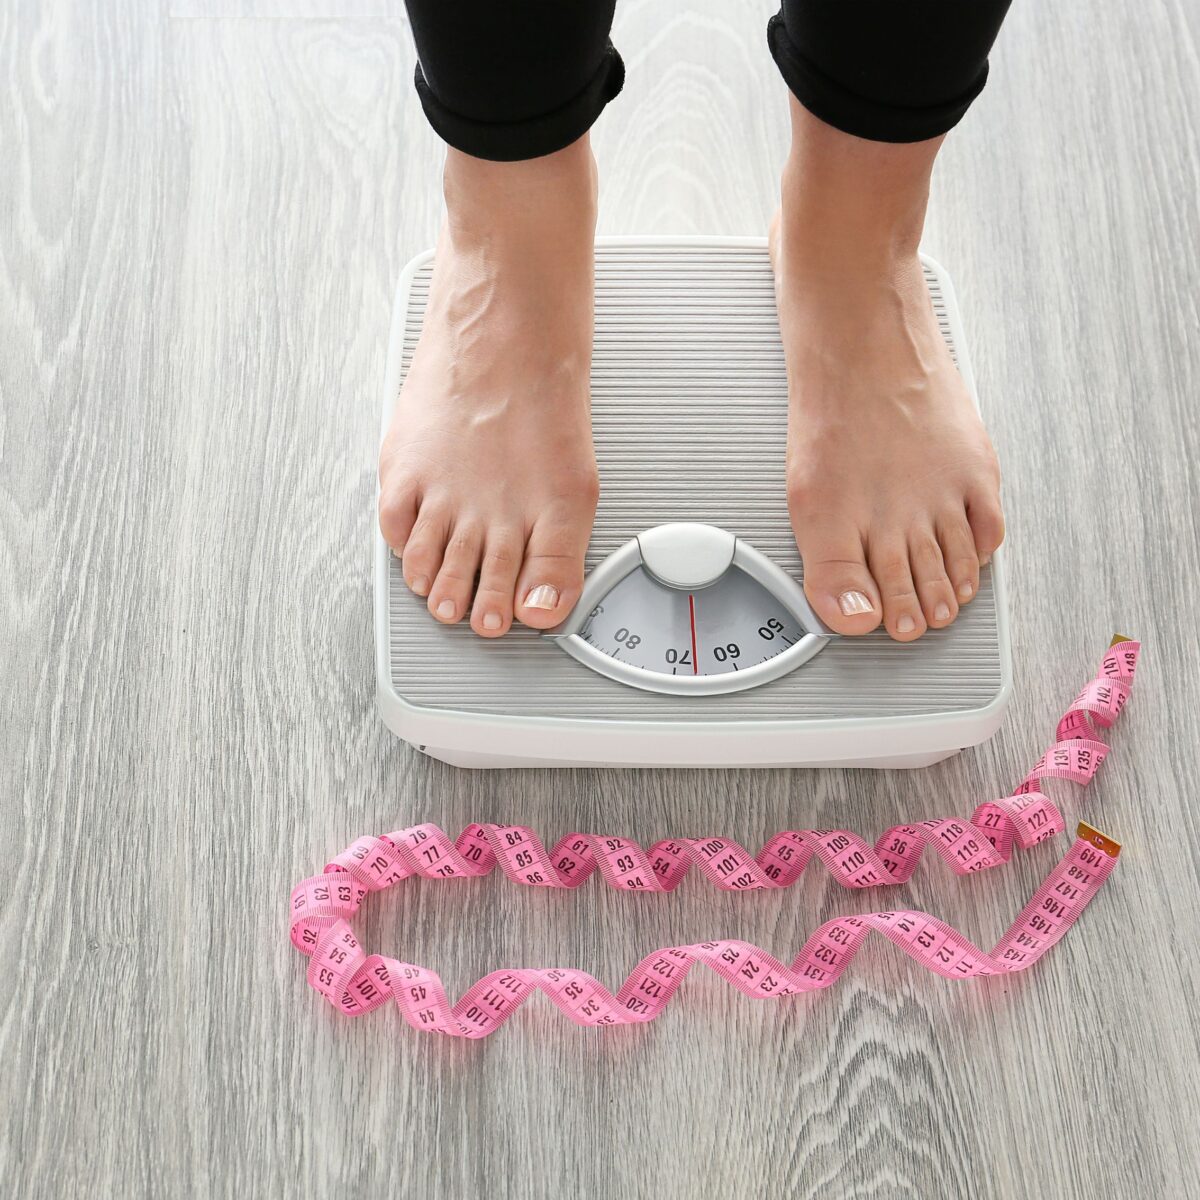 Woman weighing in on a scale with a pink measuring tape in front.